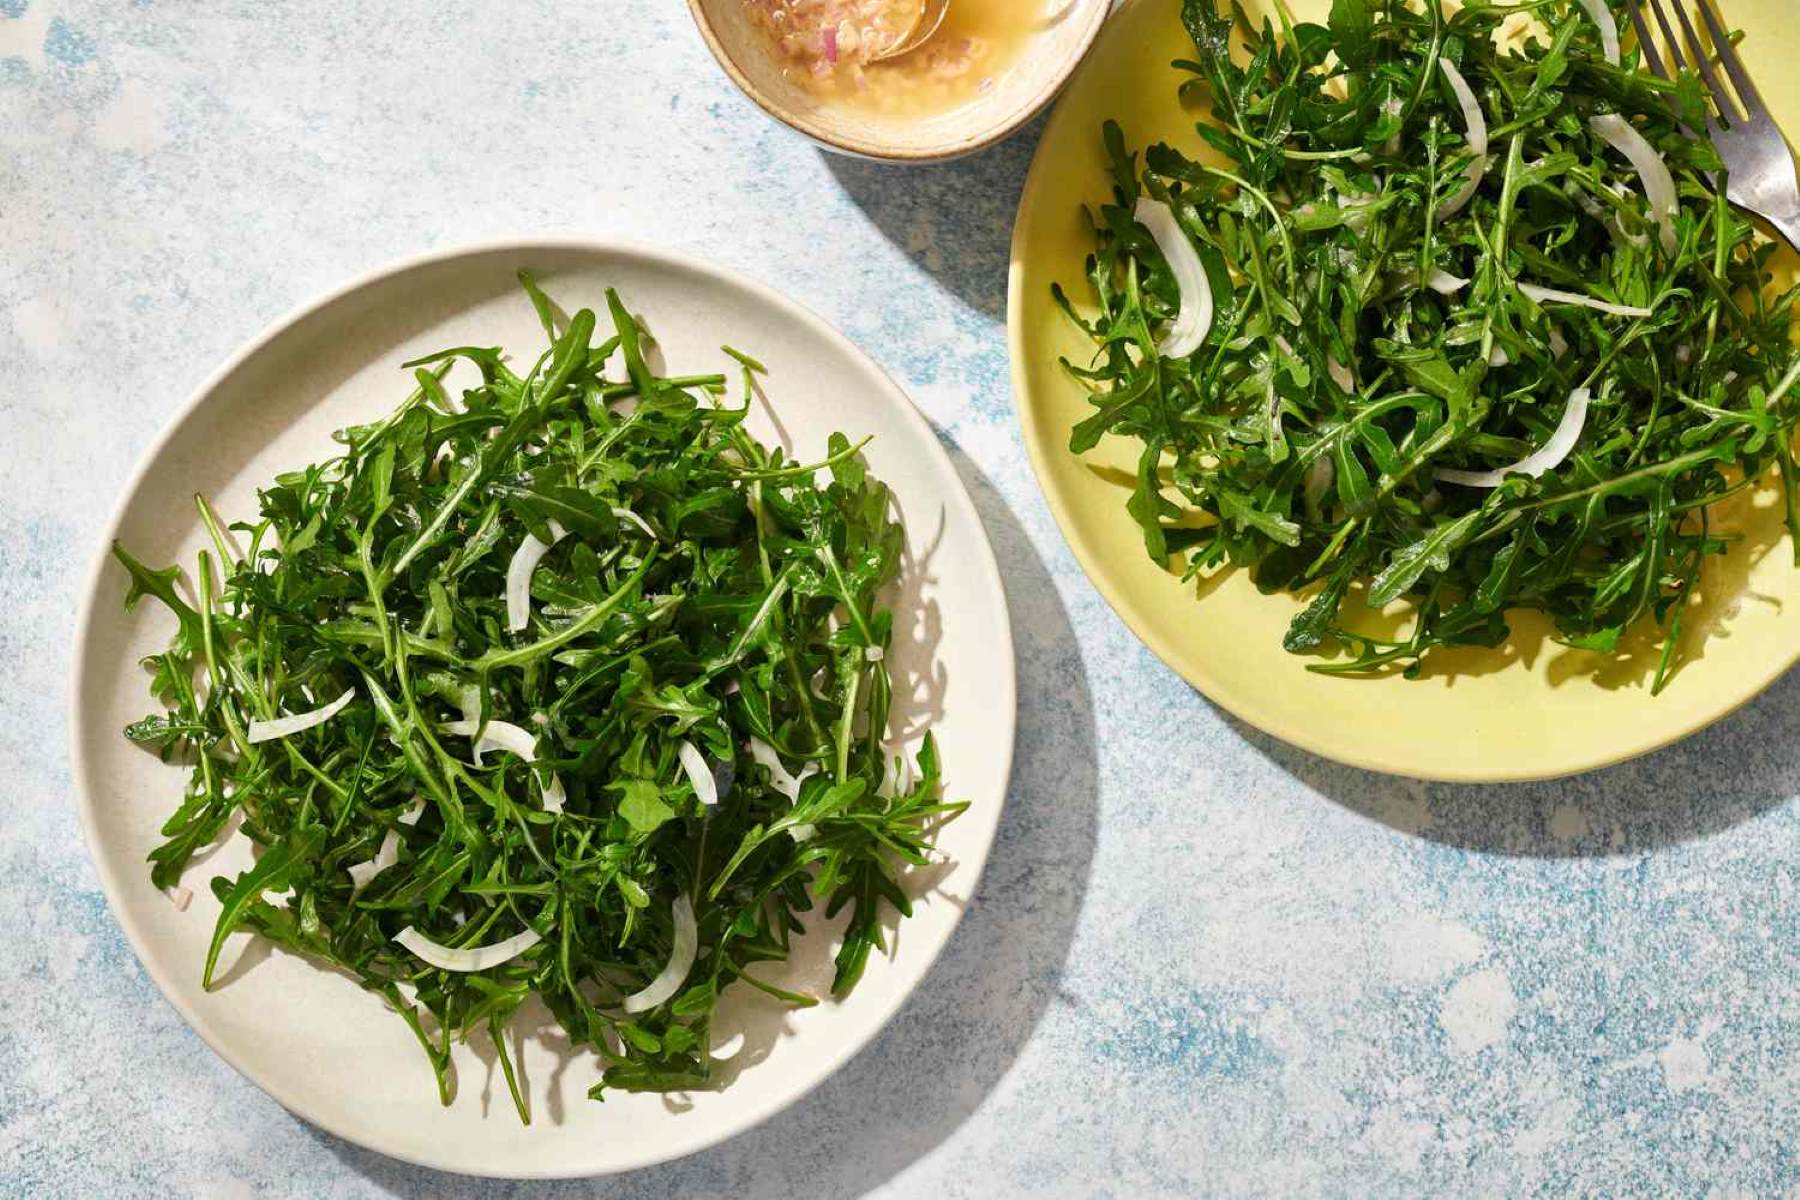 Healthy Arugula Fennel Salad With Green Lentils: A Nutritious And Delicious Option